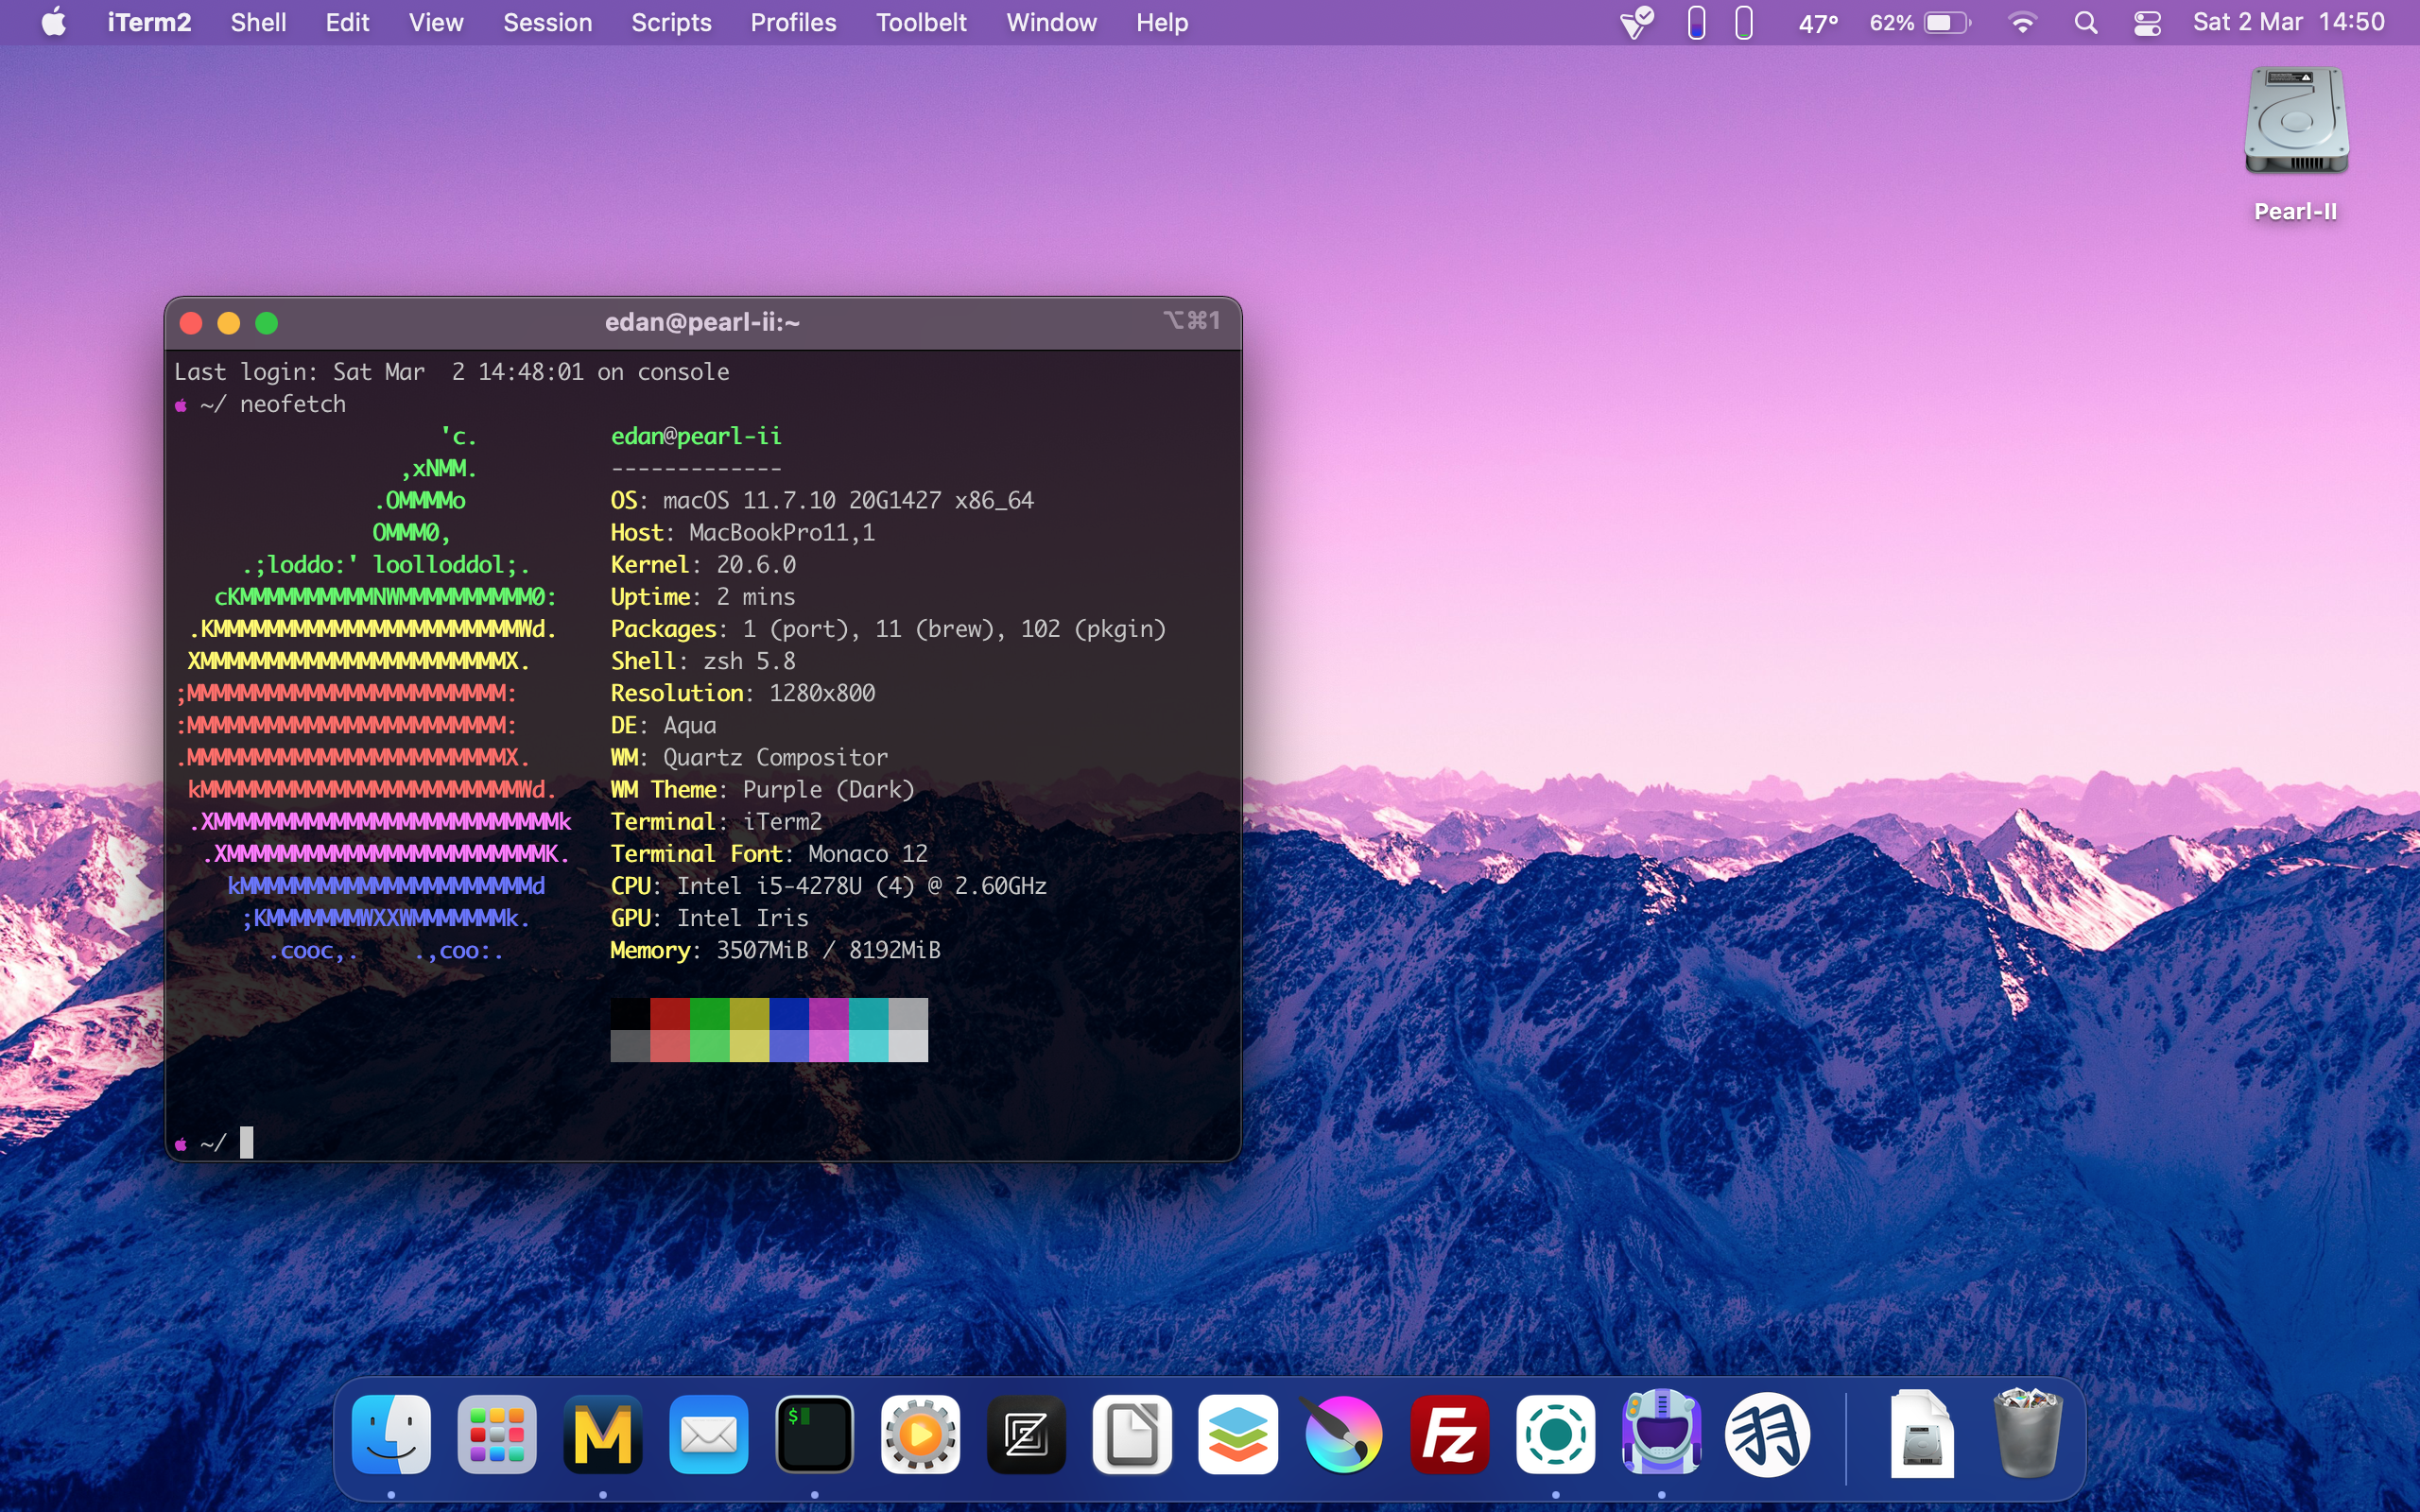 My macOS desktop, with only iTerm2 open